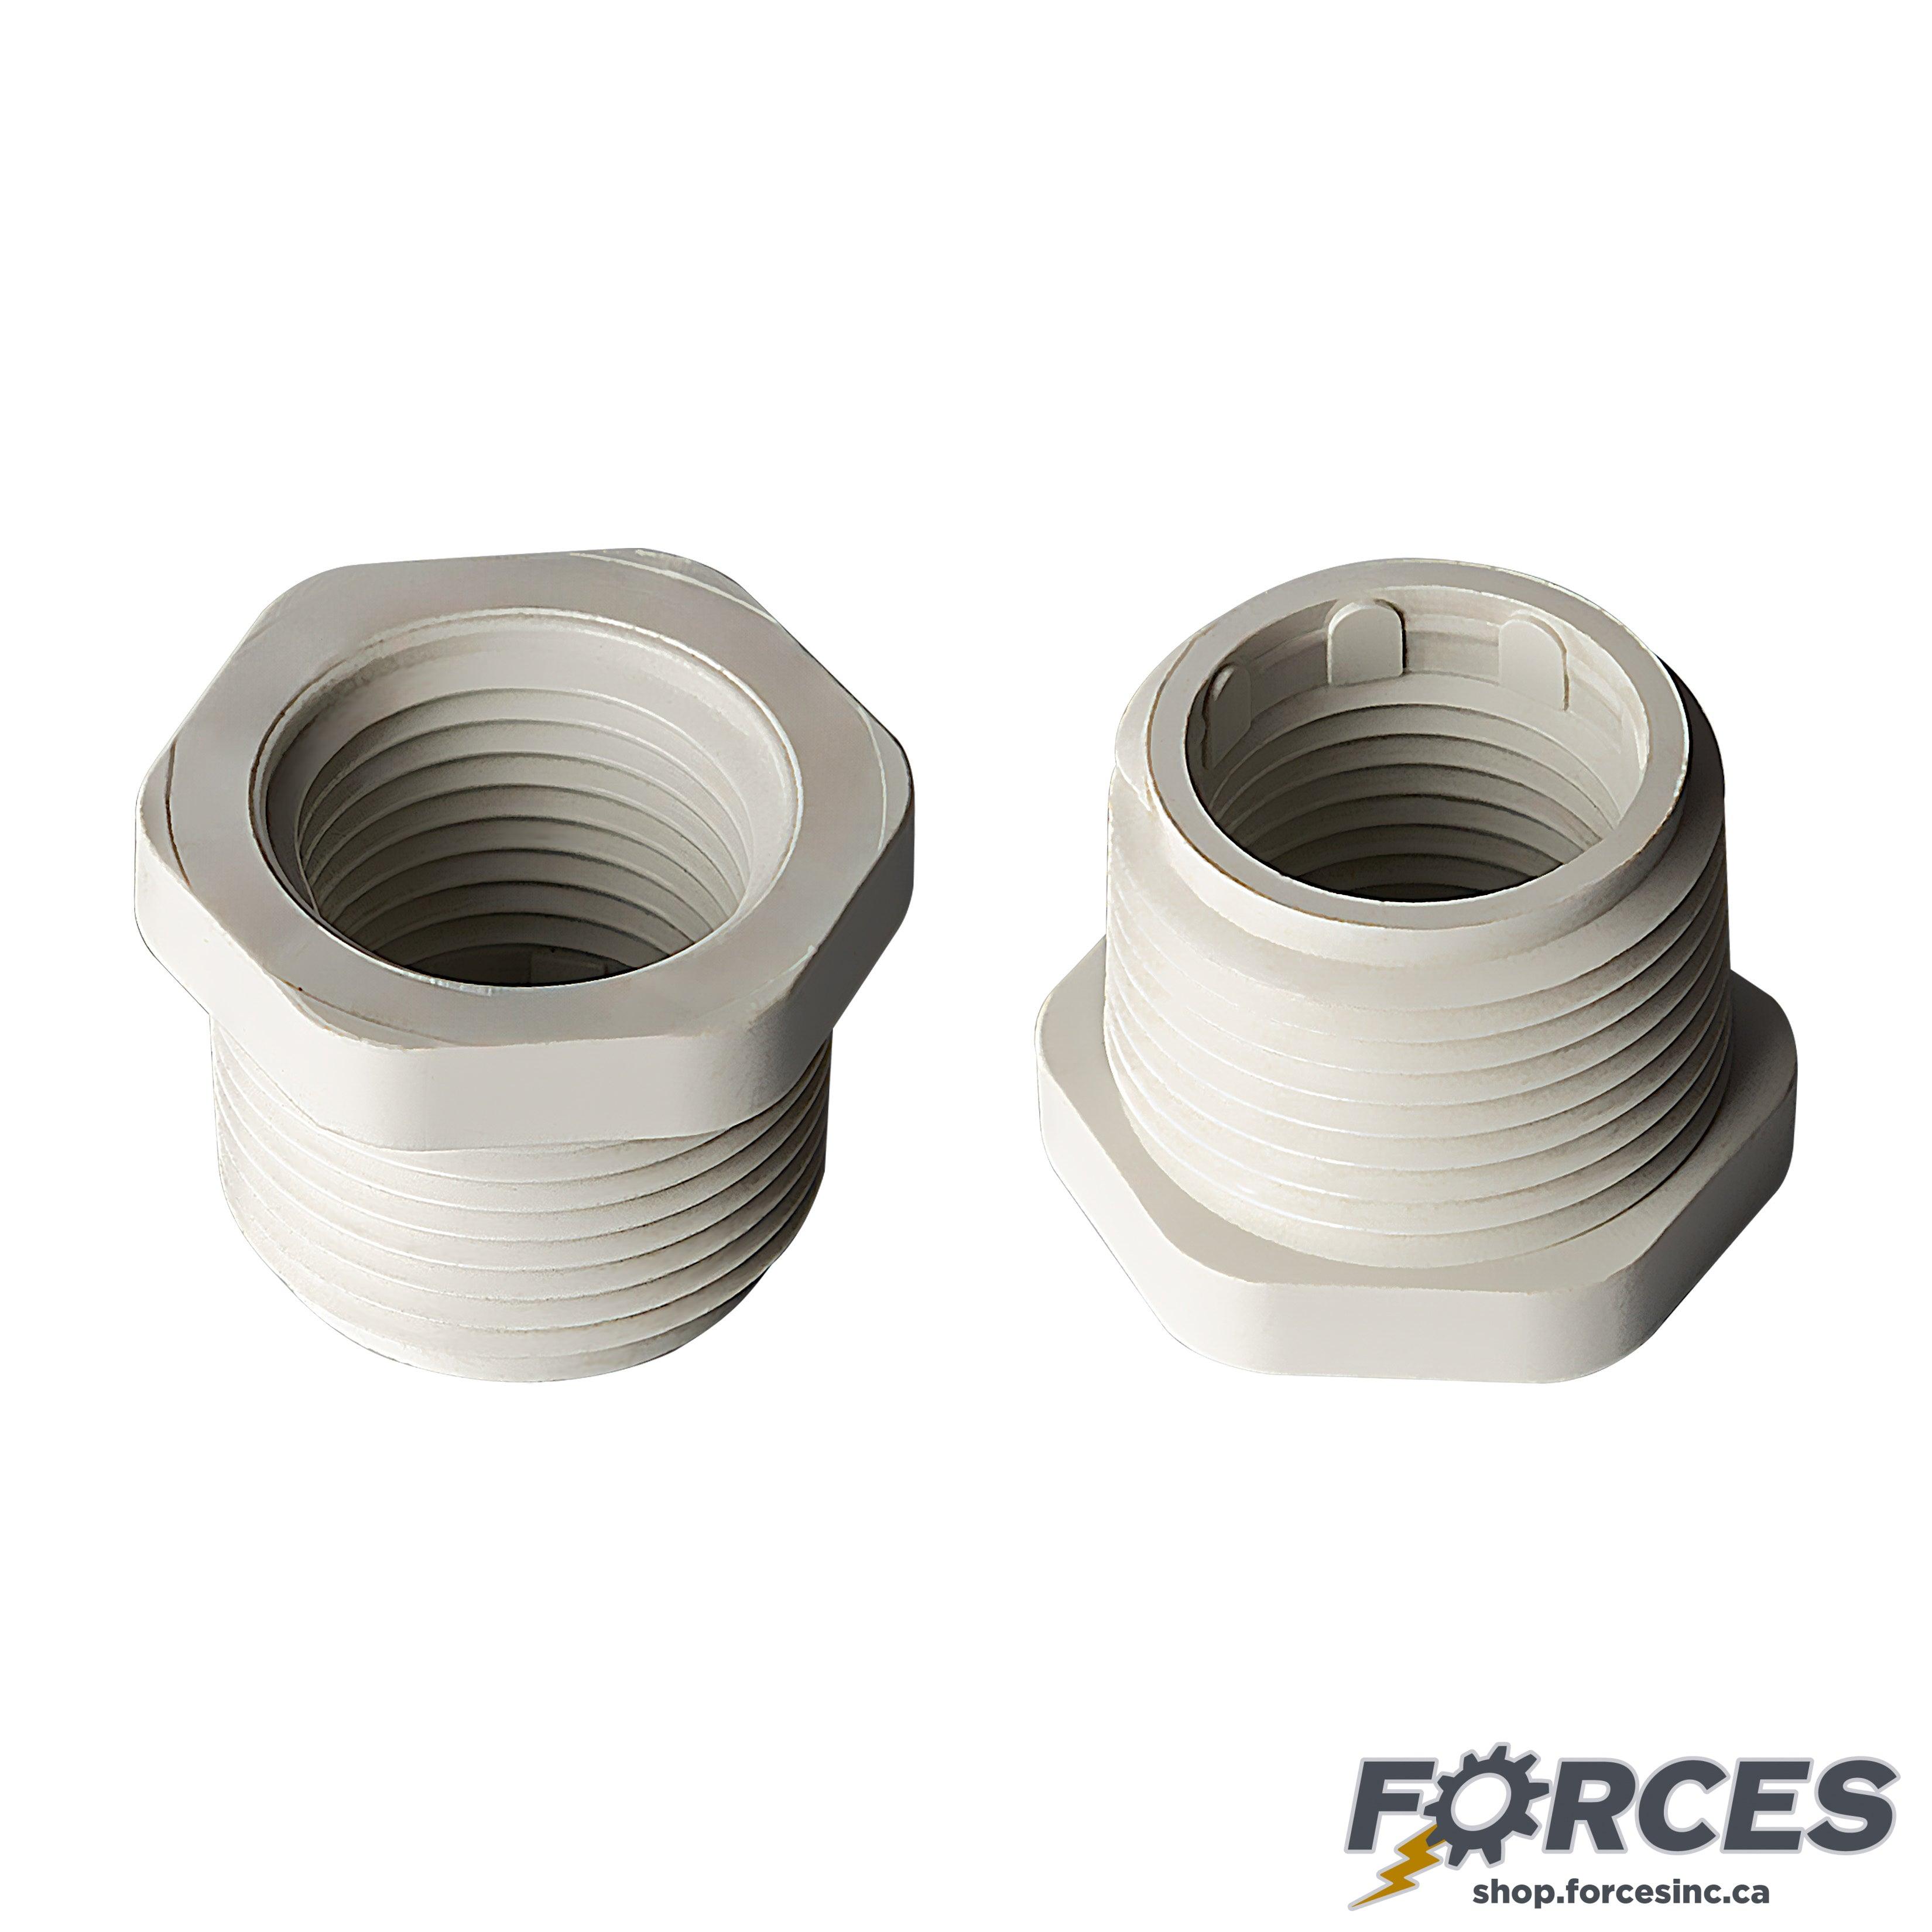 1" x 3/4" Reducer Bushing (MPT x FPT) Sch 40 - PVC white | 439131W - Forces Inc